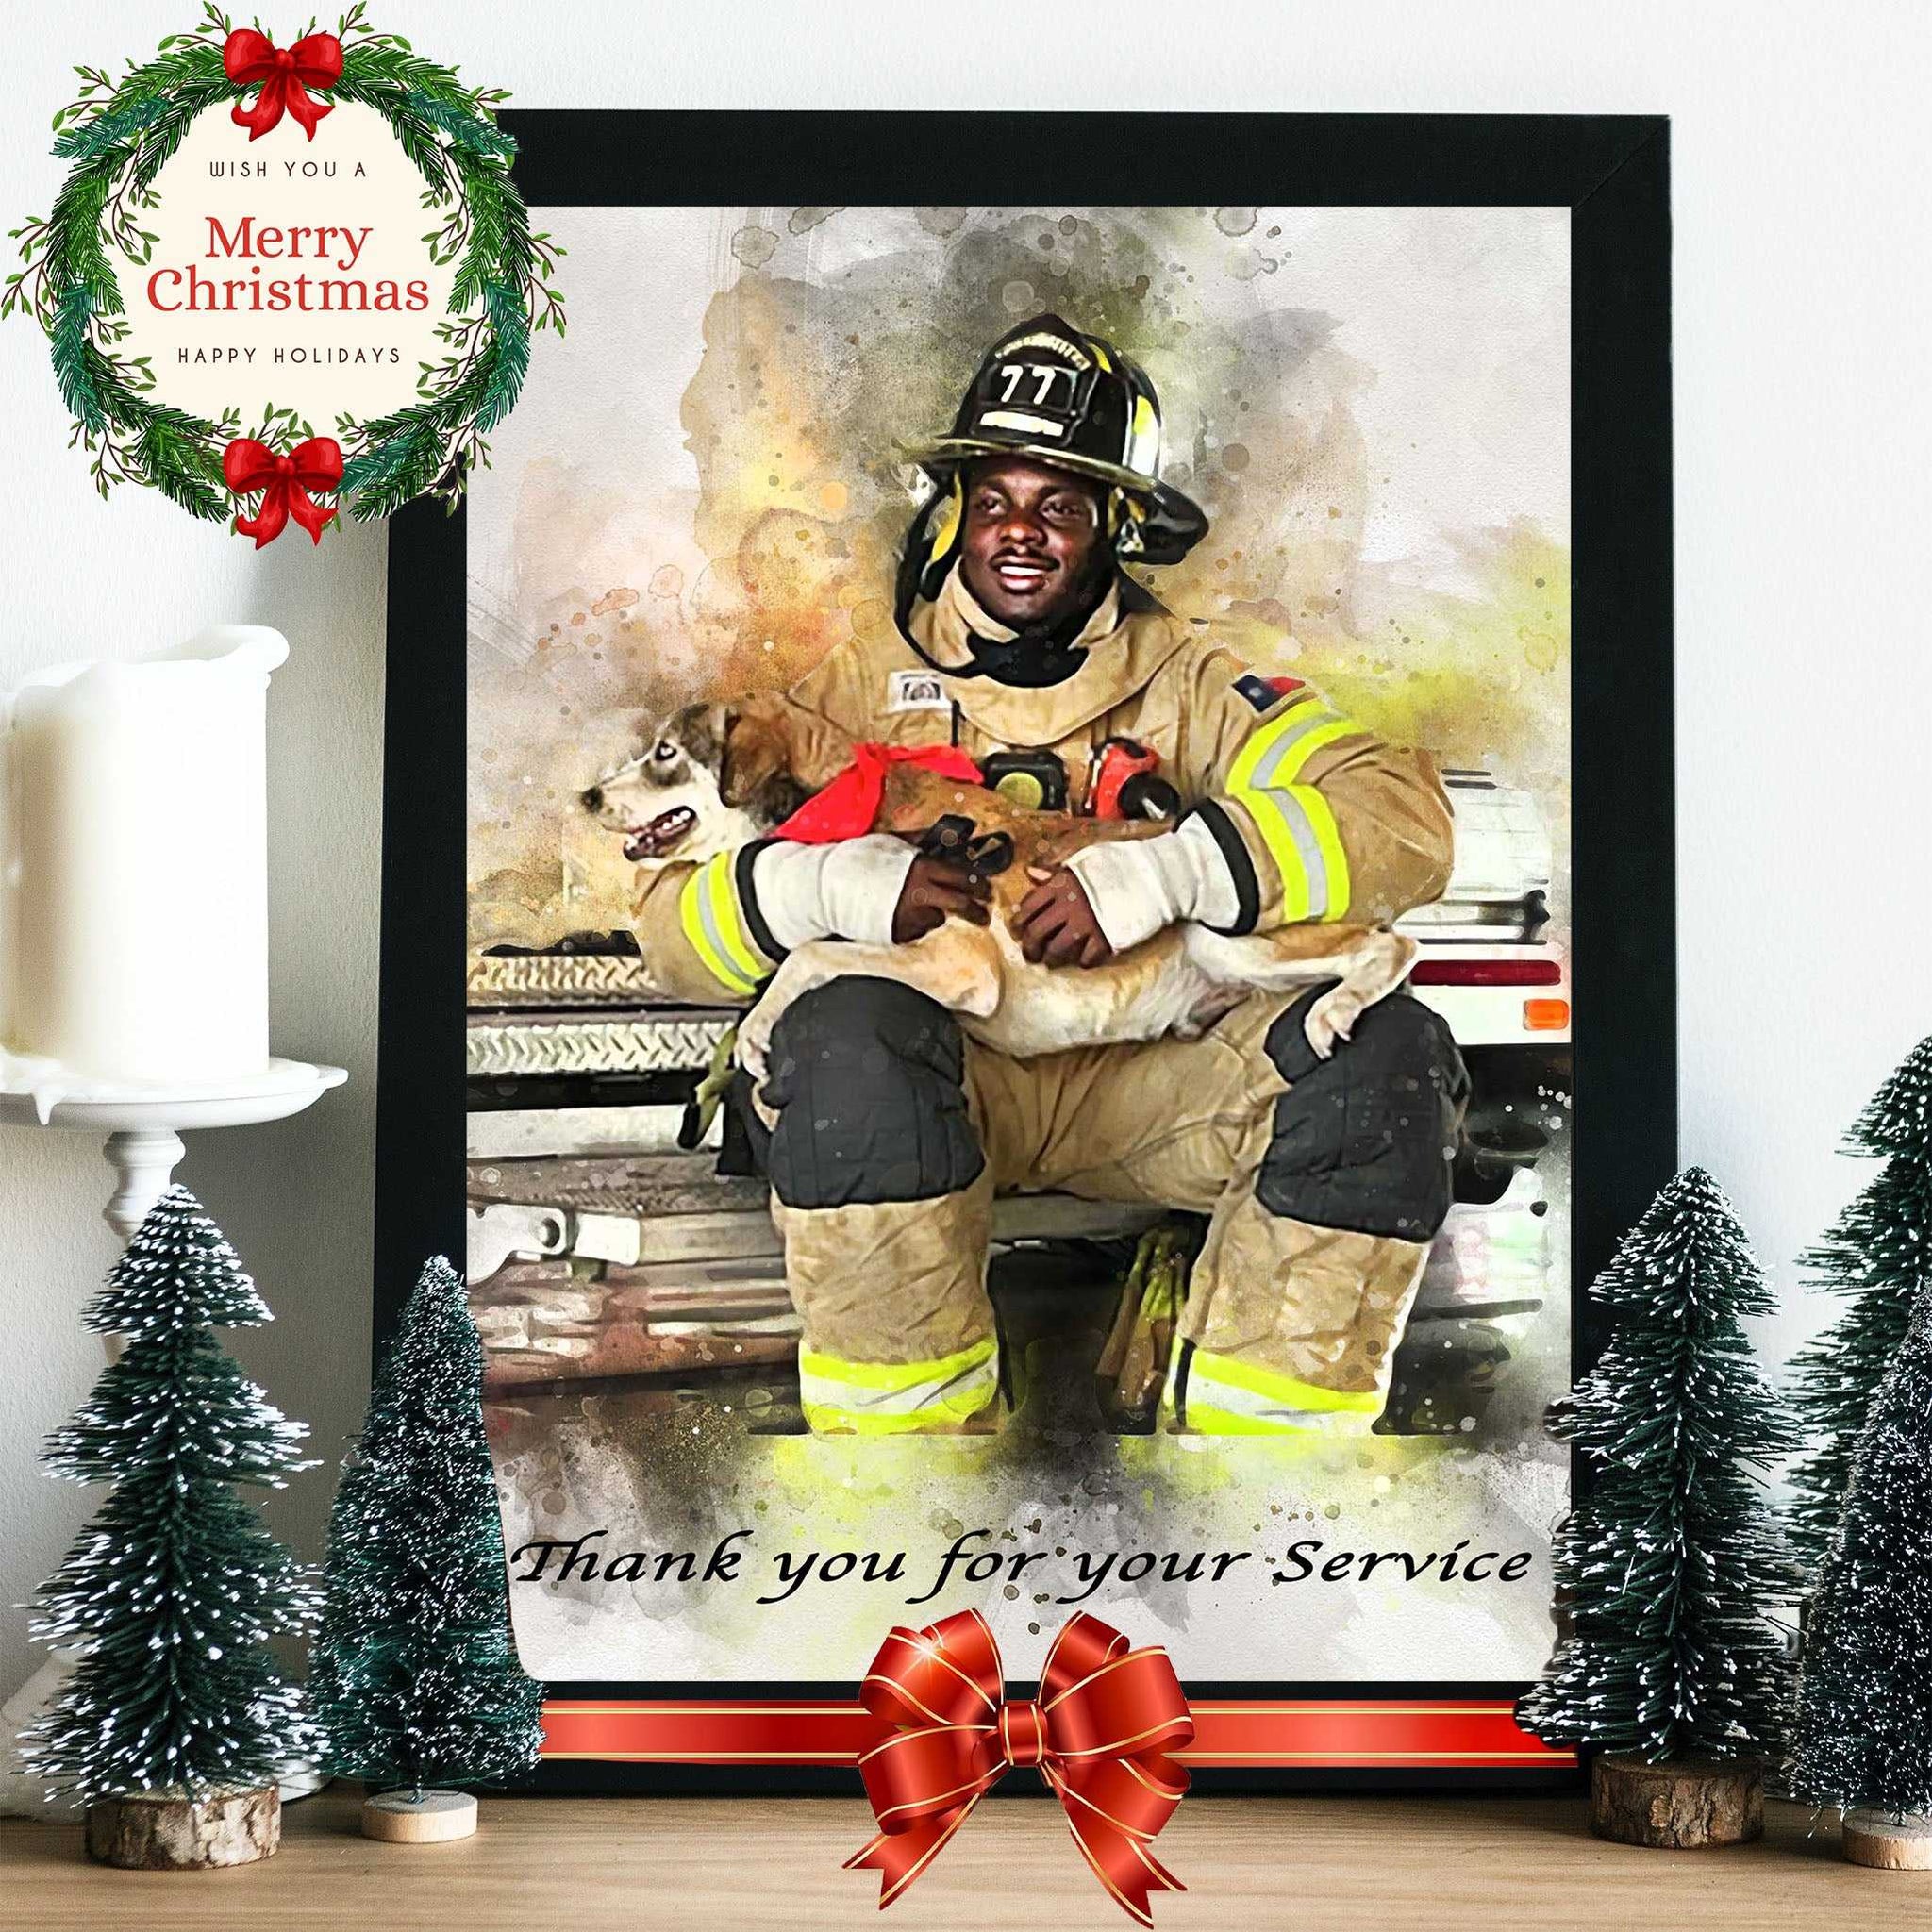 Christmas Gift for Firefighter 🔥🧯 Gift Ideas for Firefighter | Fireman Gifts | Fire Department Gifts | Firefighter Presents Ideas - FromPicToArt